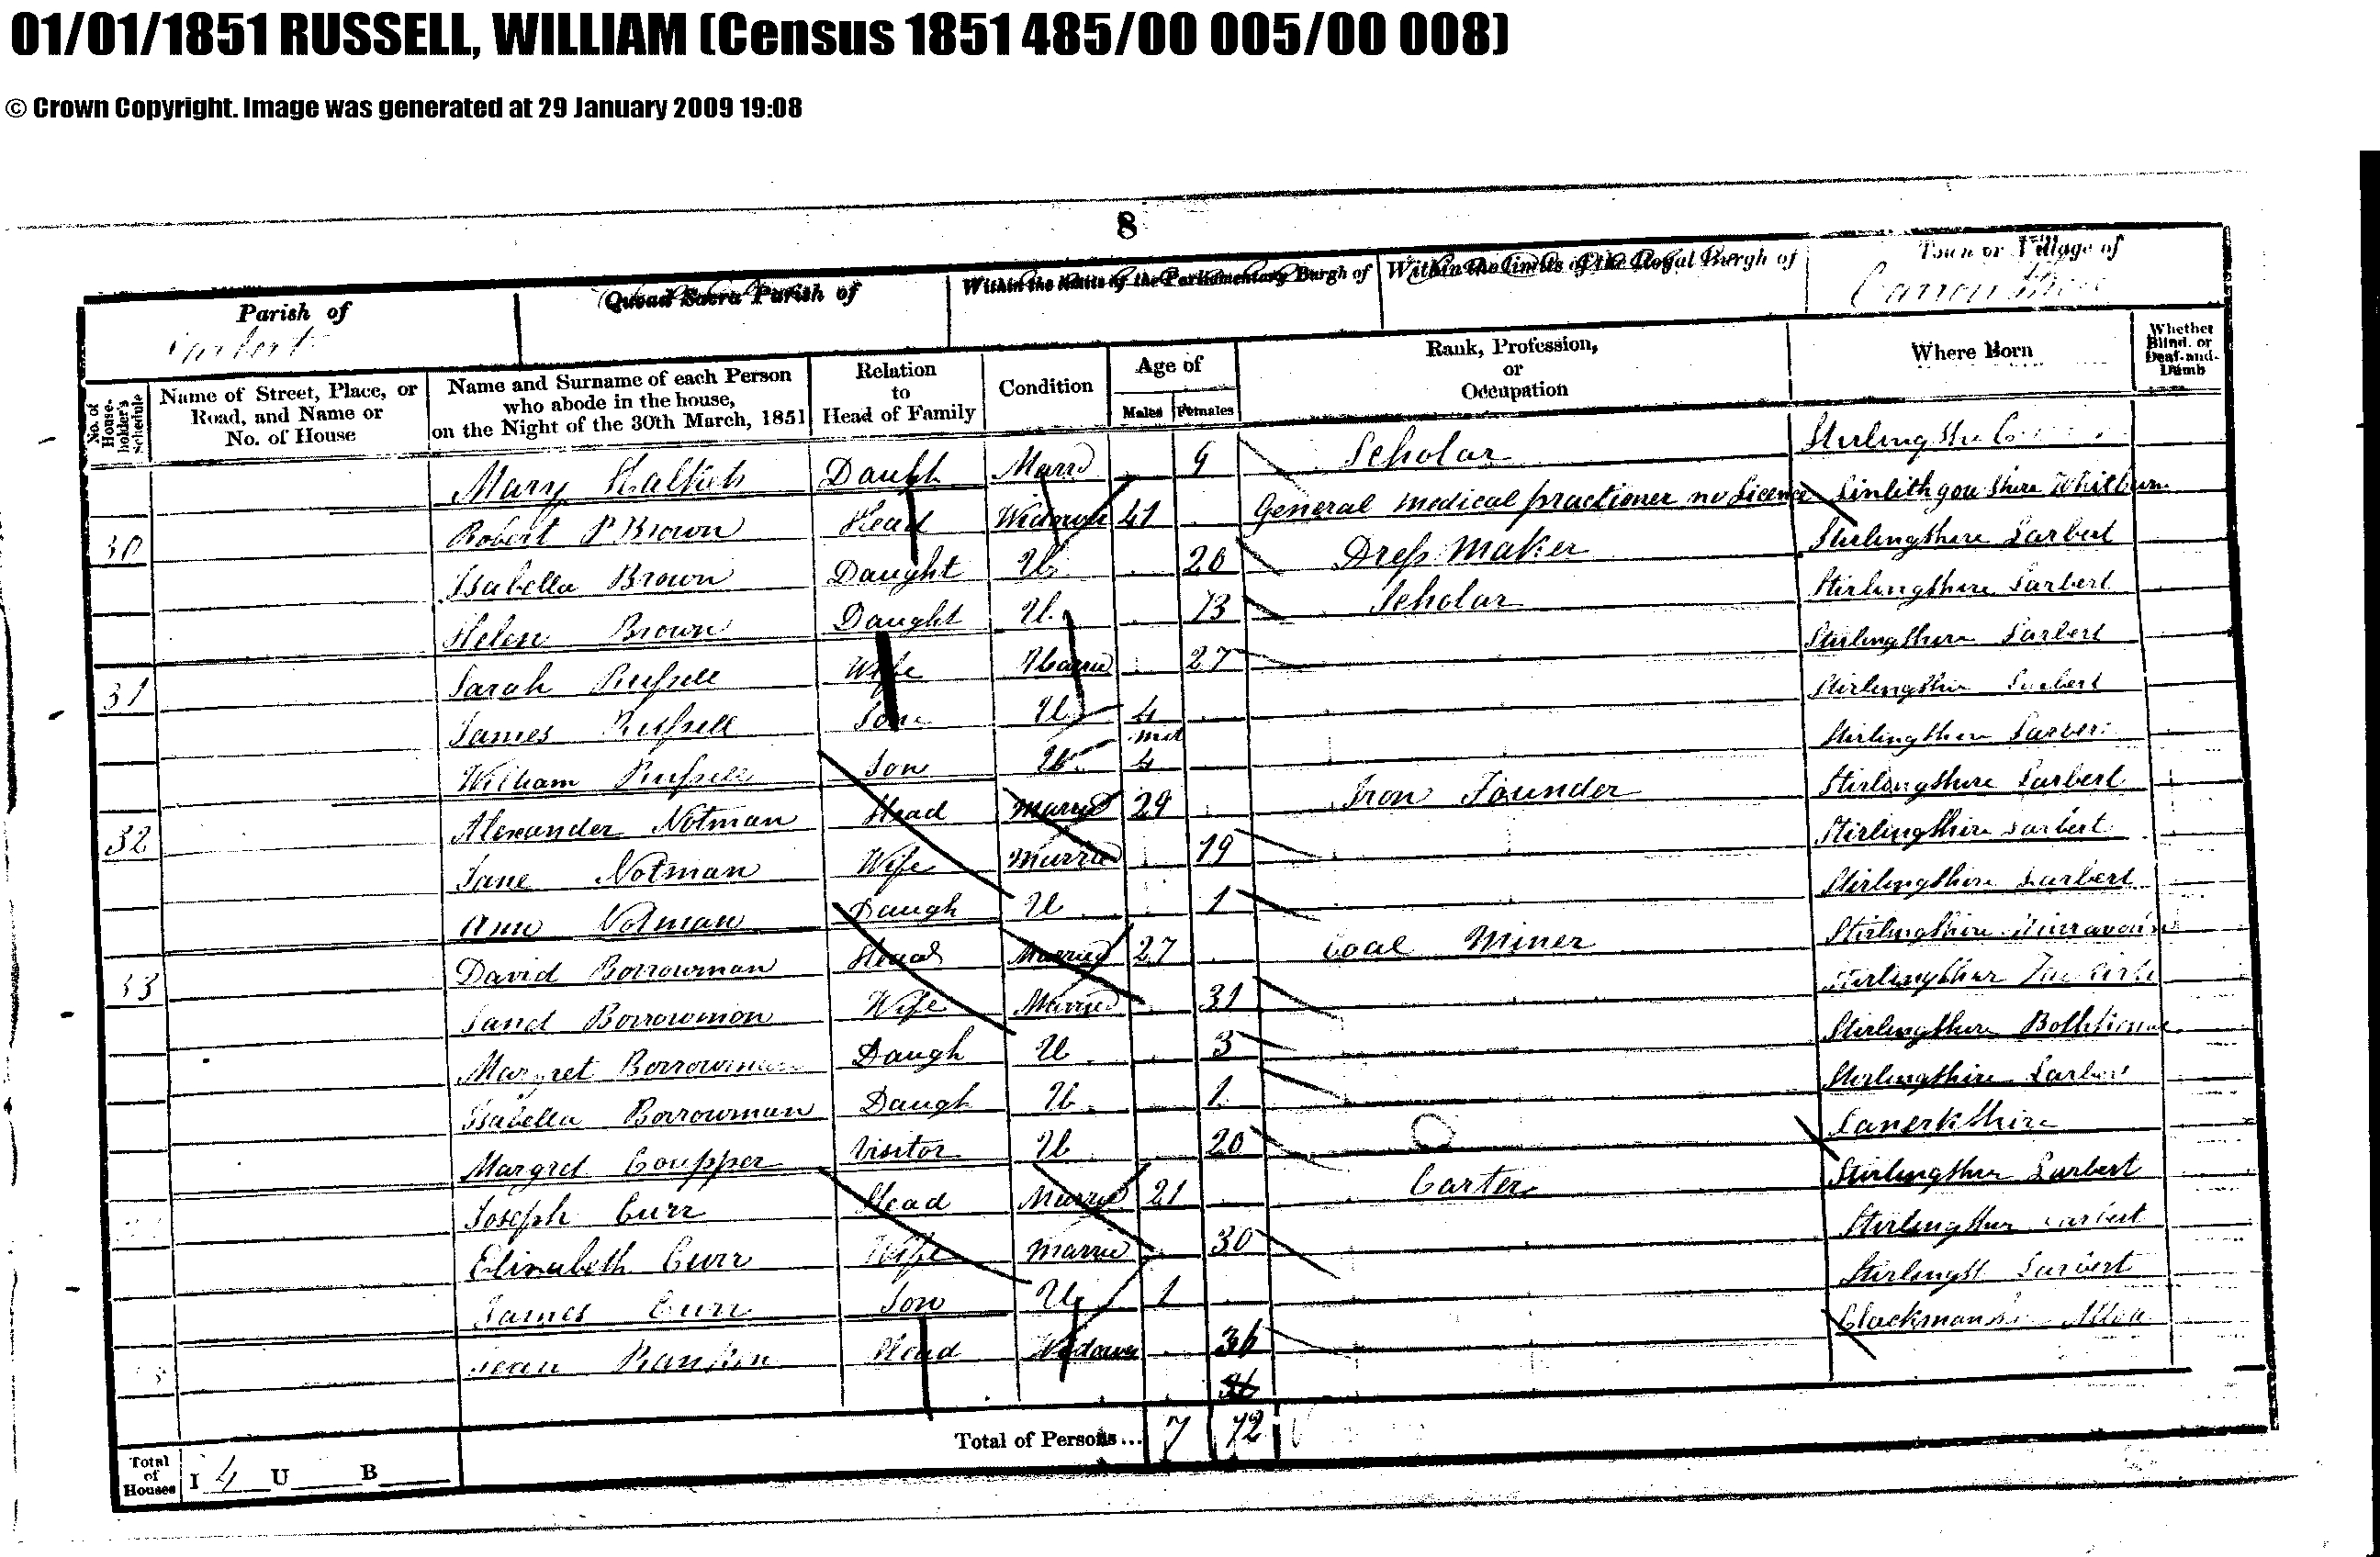 Census 1851 RUSSELL & NOTMAN Families, March 30, 1851, Linked To: <a href='i933.html' >William Notman Russell</a>